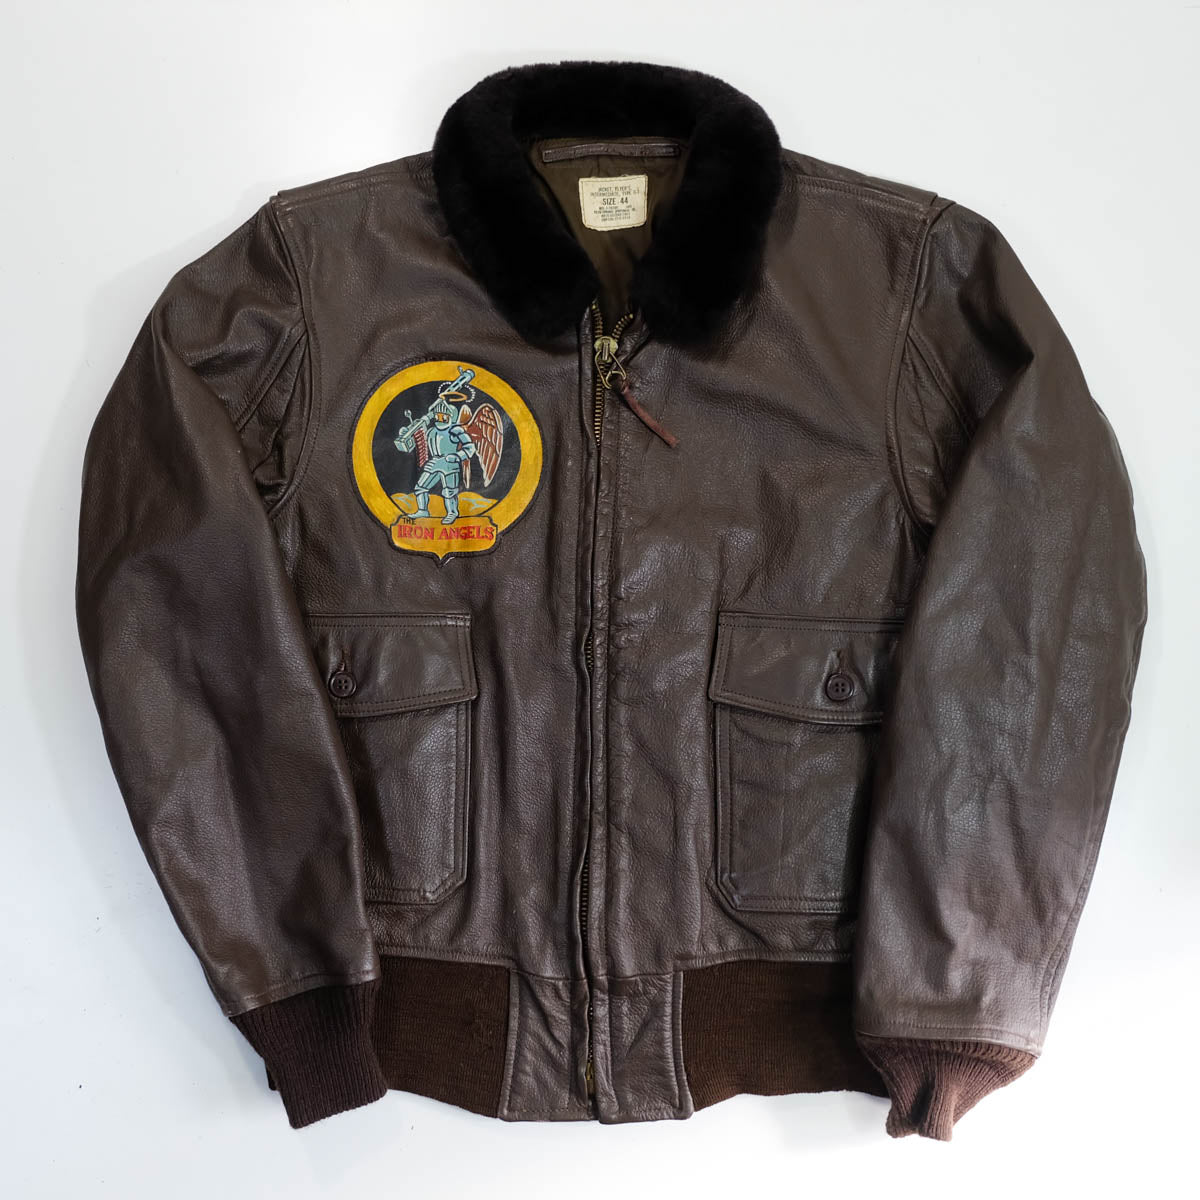 "Iron Angel" Vintage A-2 Sexy Pinup Girl Handpainted Military Flight Bomber Leather Jacket